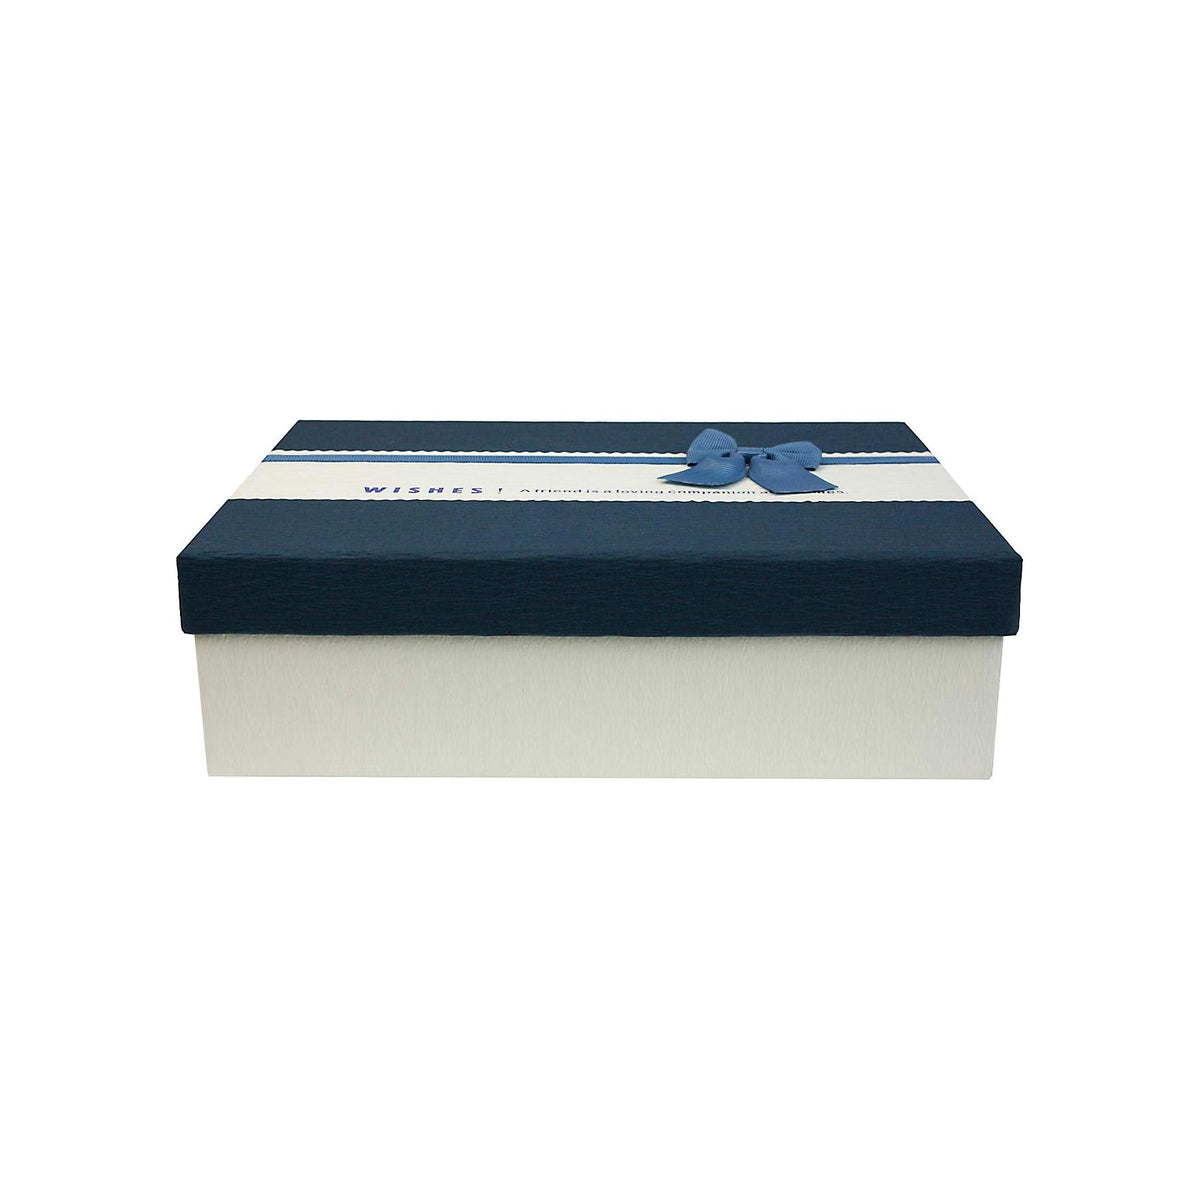 Cream colored rectangle gift box with blue lid and decorative ribbon